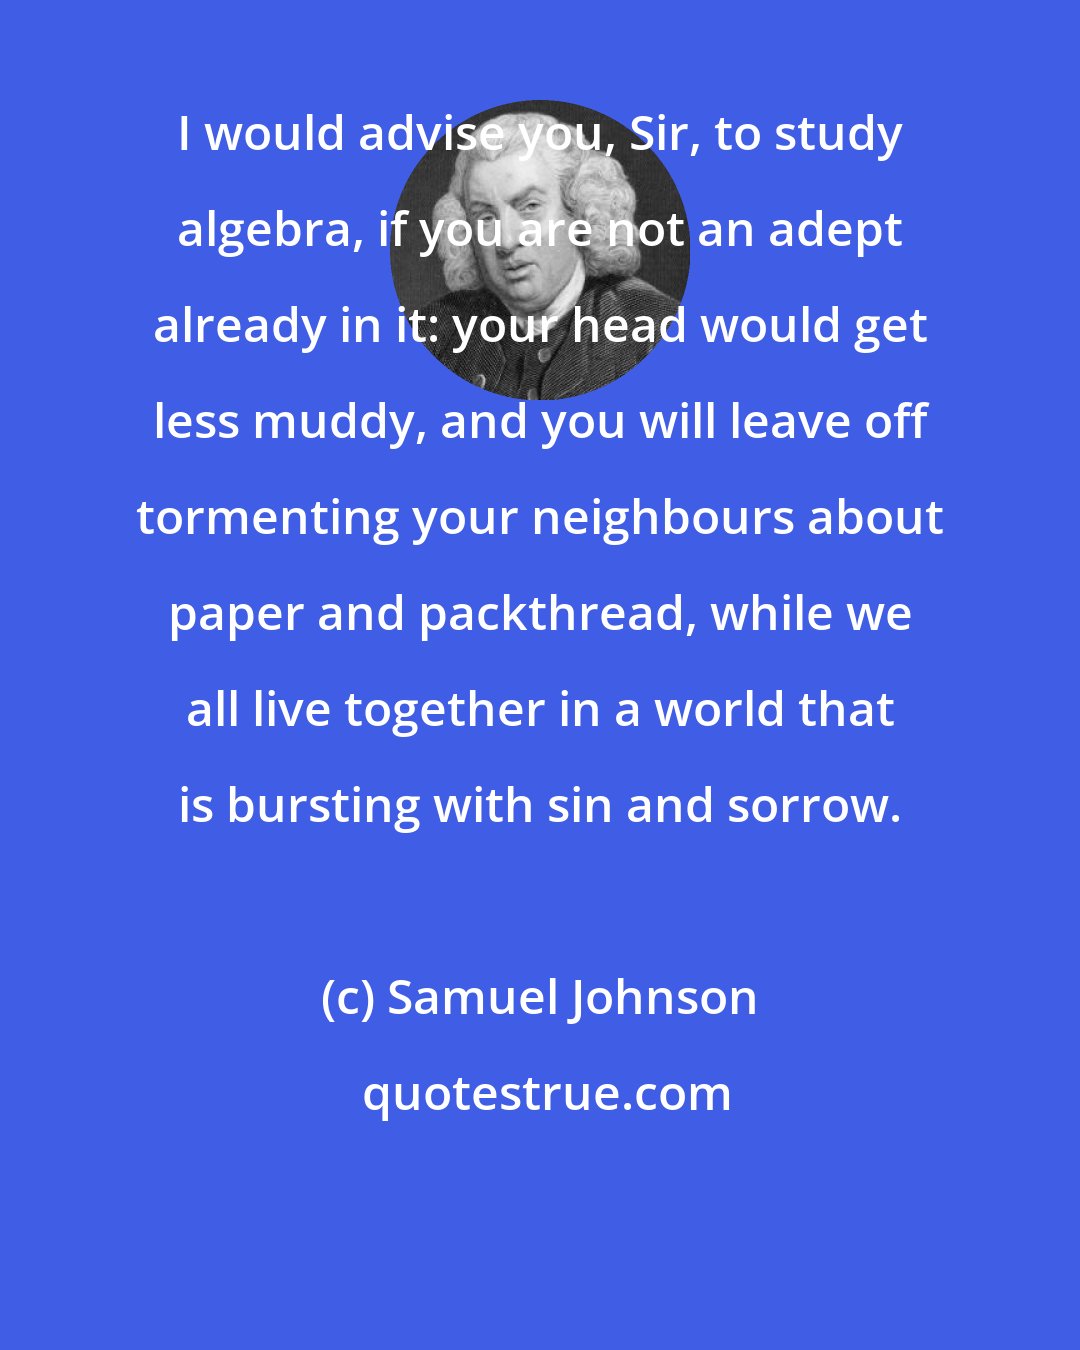 Samuel Johnson: I would advise you, Sir, to study algebra, if you are not an adept already in it: your head would get less muddy, and you will leave off tormenting your neighbours about paper and packthread, while we all live together in a world that is bursting with sin and sorrow.